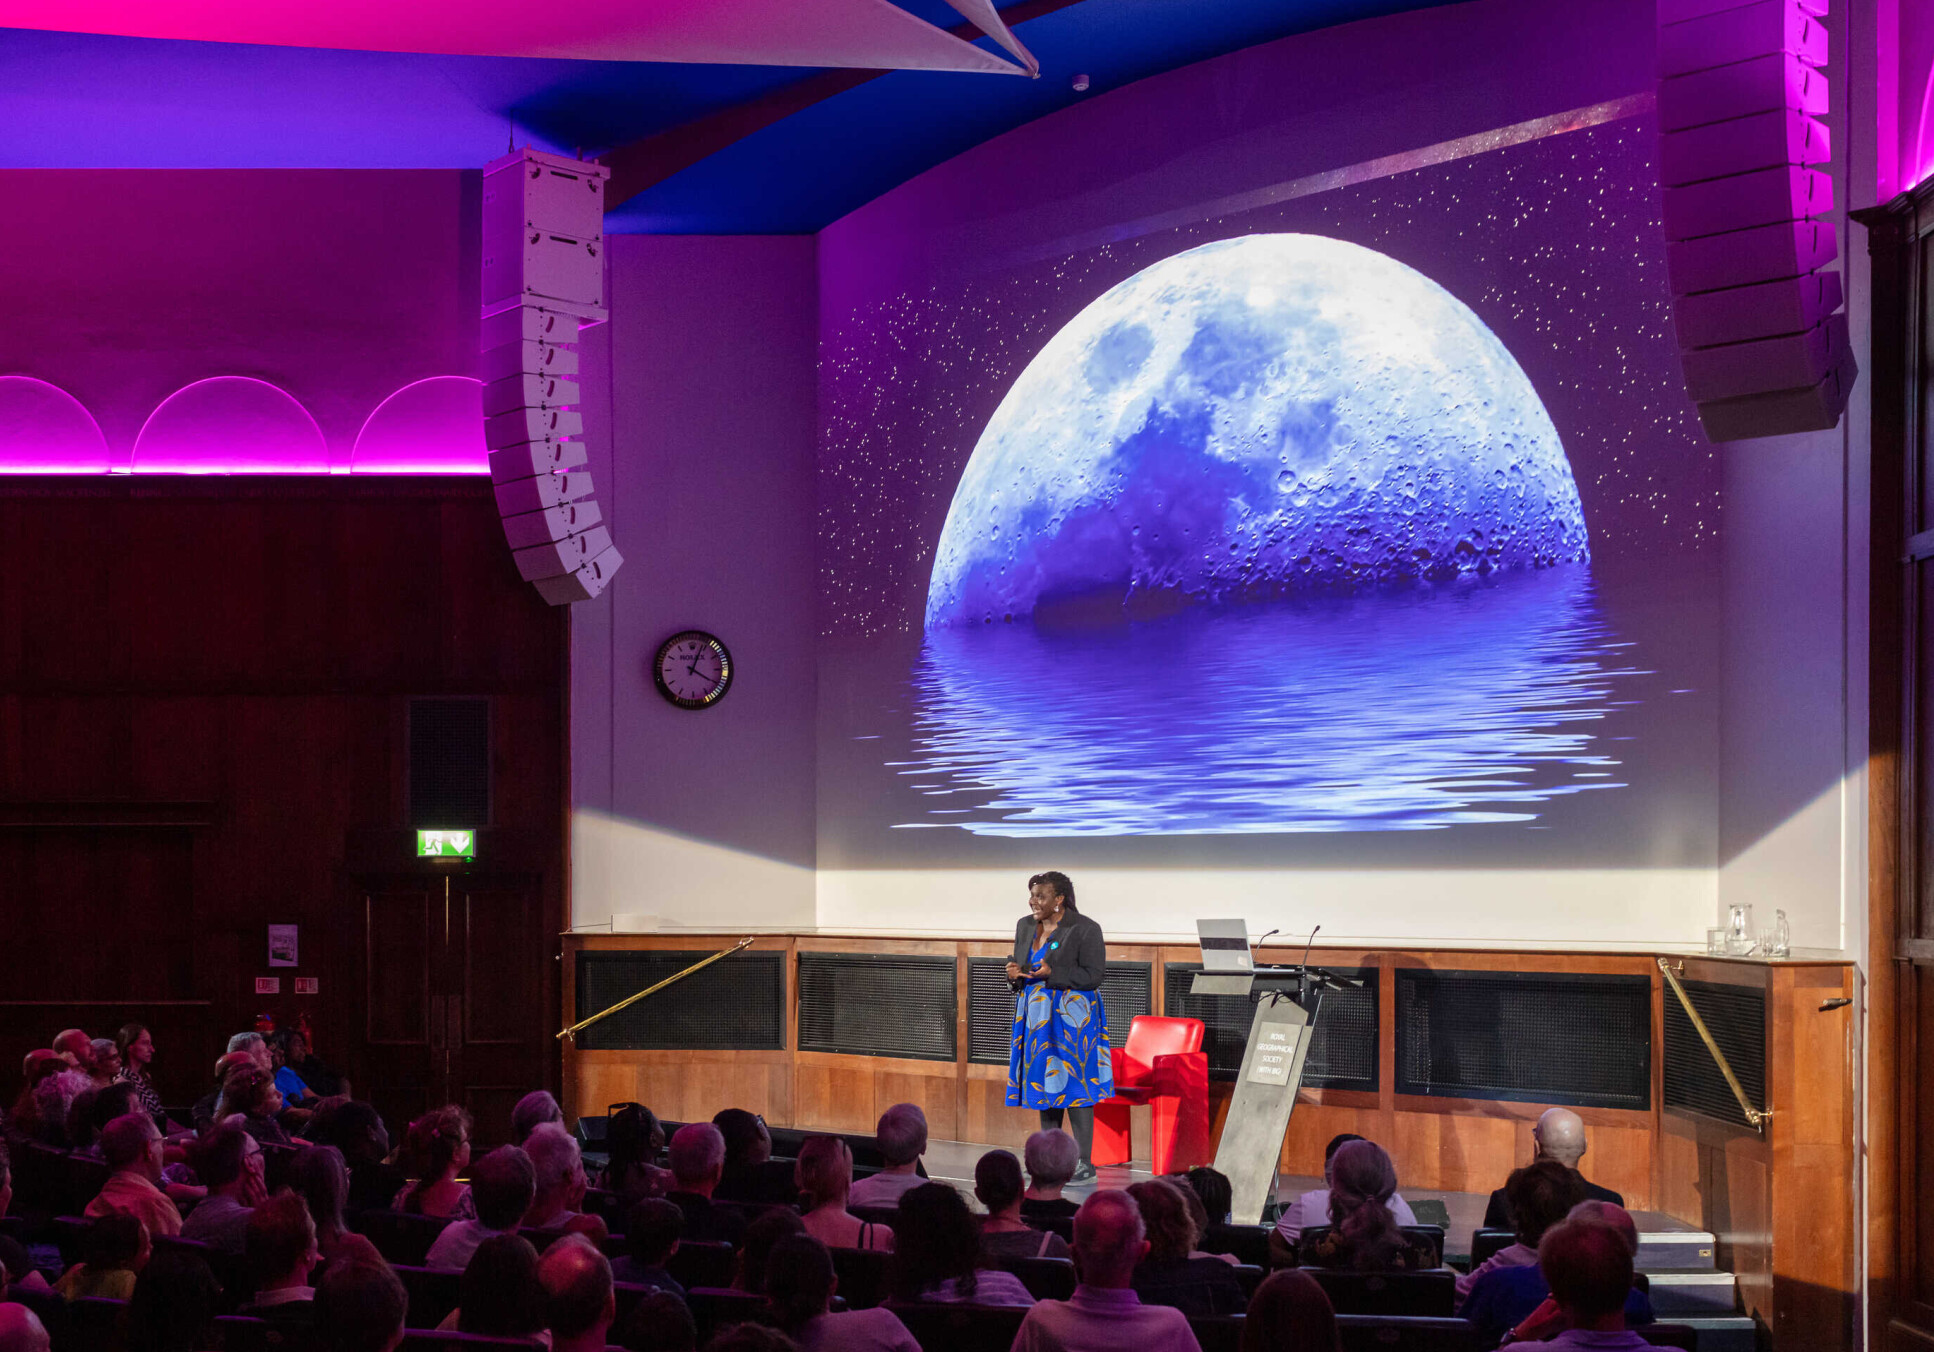 Dr Maggie Aderin Pocock giving a talk with large photo of the moon projected on a screen